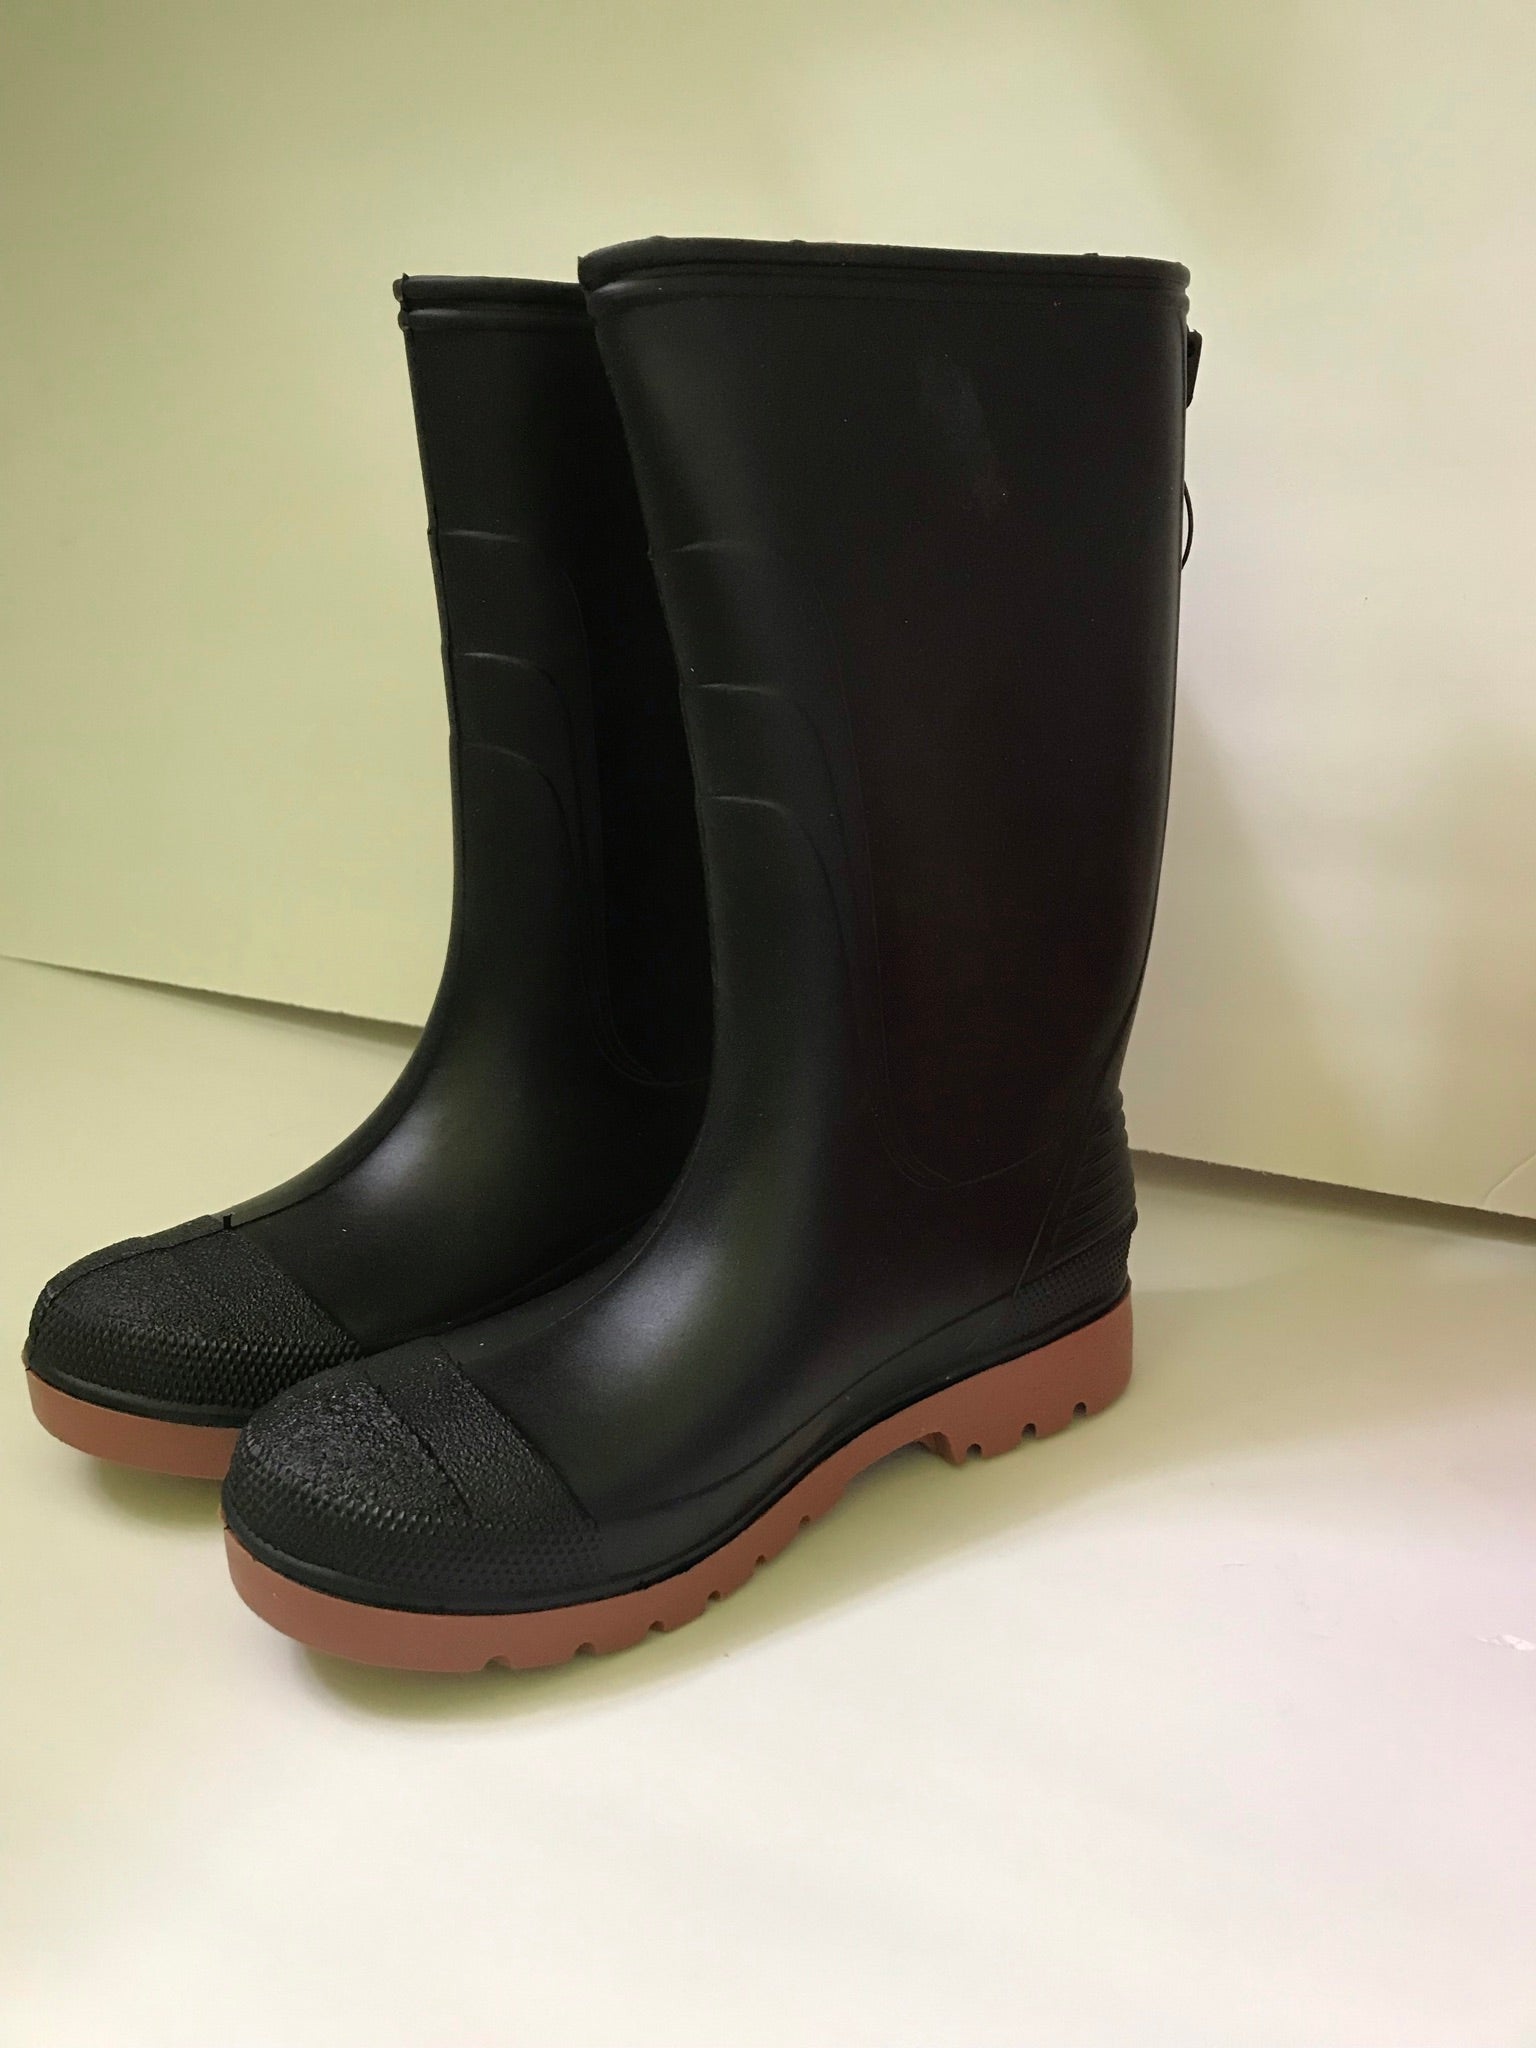 All Purpose Rubber Boots - Adult